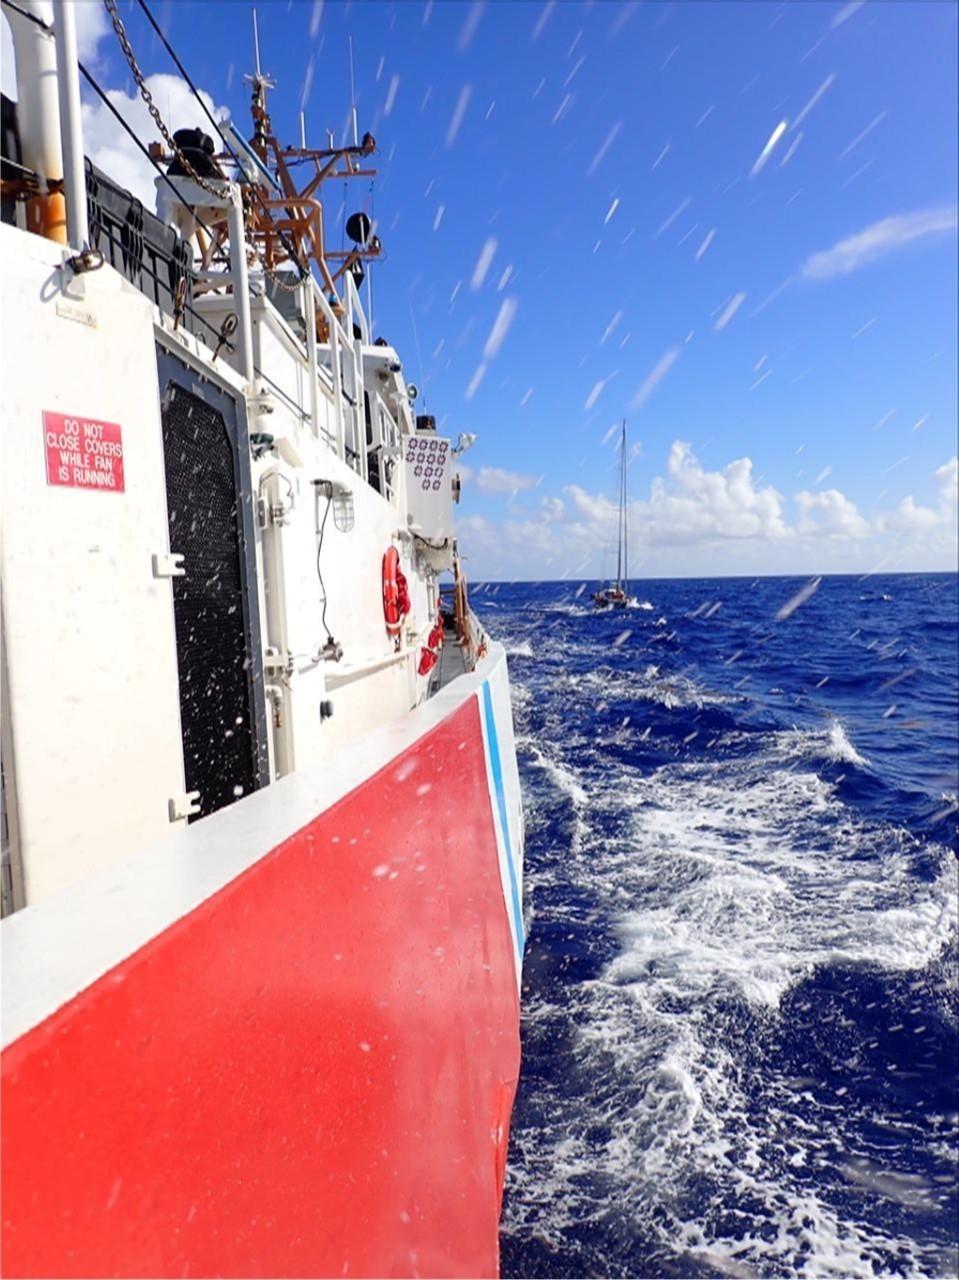 The Coast Guard Cutter Joseph Tezanos tows the sailing vessel Valour in the Atlantic Ocean June 24, 2022, approximately 300 nautical miles north of Puerto Rico. The four-day response involved Coast Guard air and surface crews, which rescued three mariners, U.S. citizens, and brought the sailing vessel to safe harbor in Fajardo, Puerto Rico the morning of June 26, 2022.